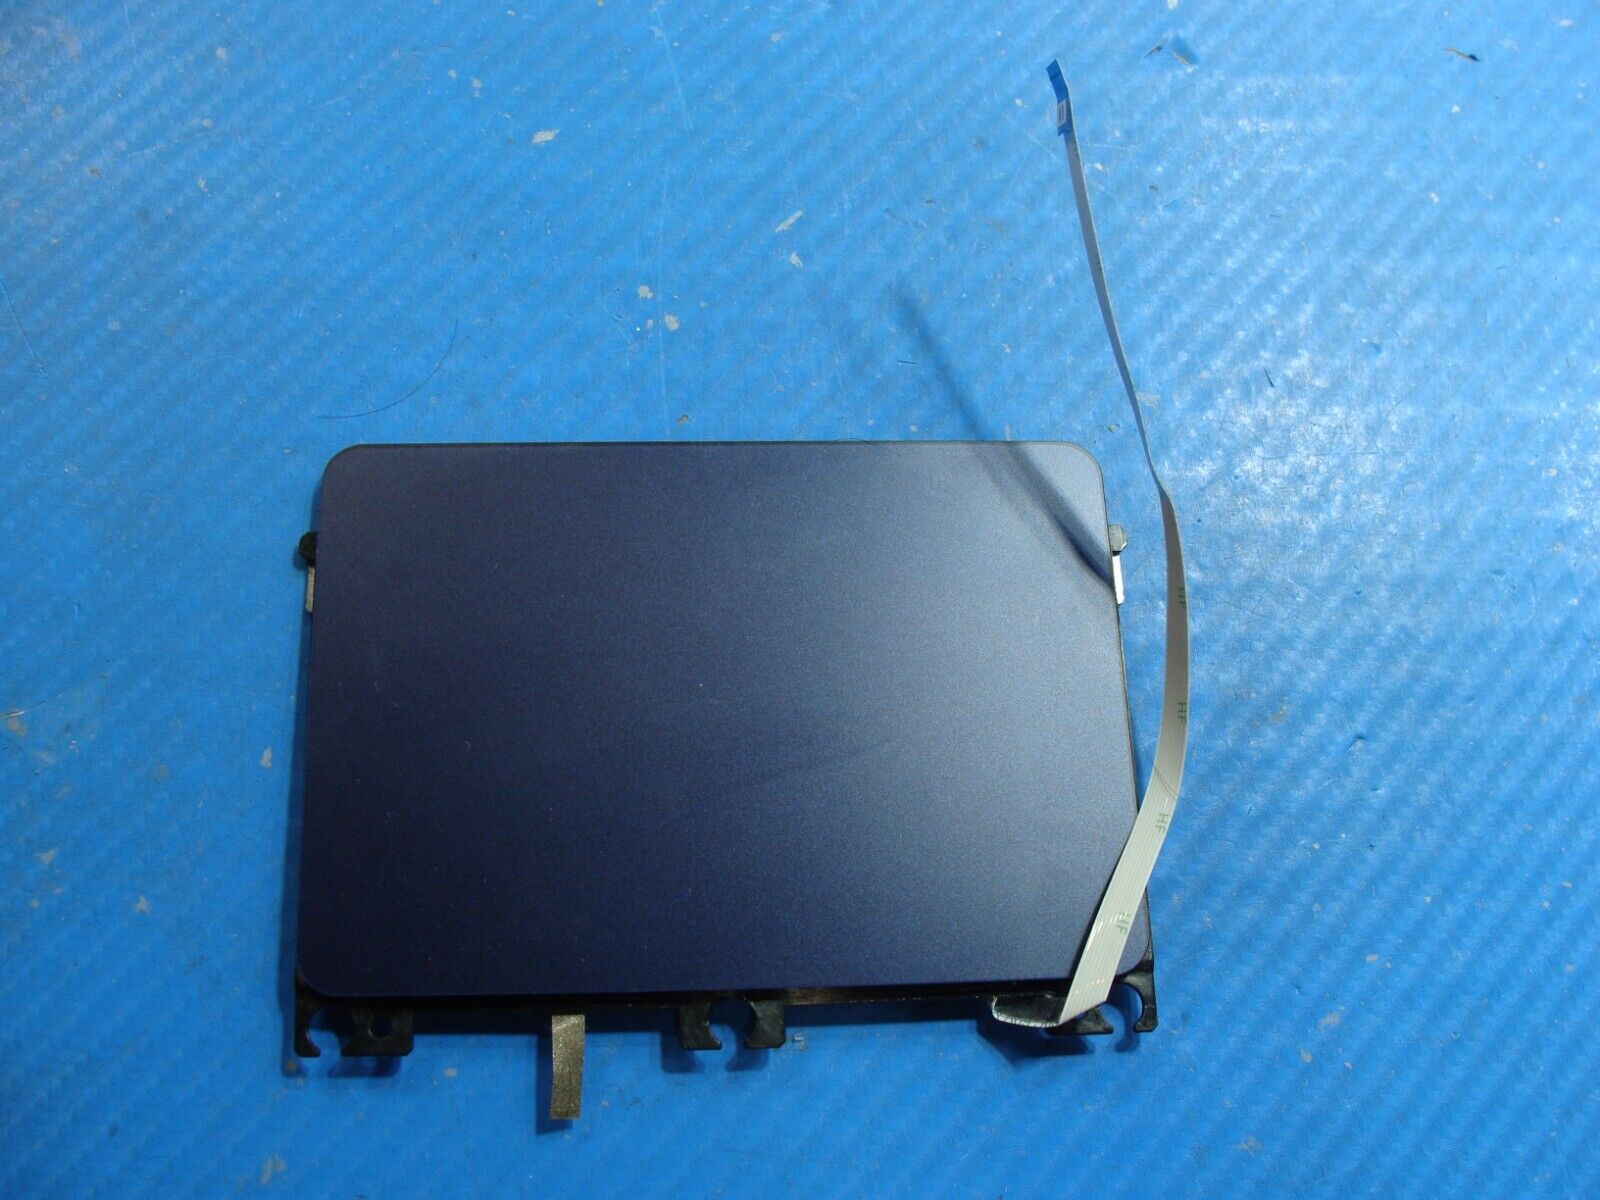 Asus ZenBook 15.6” UX533FD OEM TouchPad w/Cables 04060-01400000 13N1-62A0901